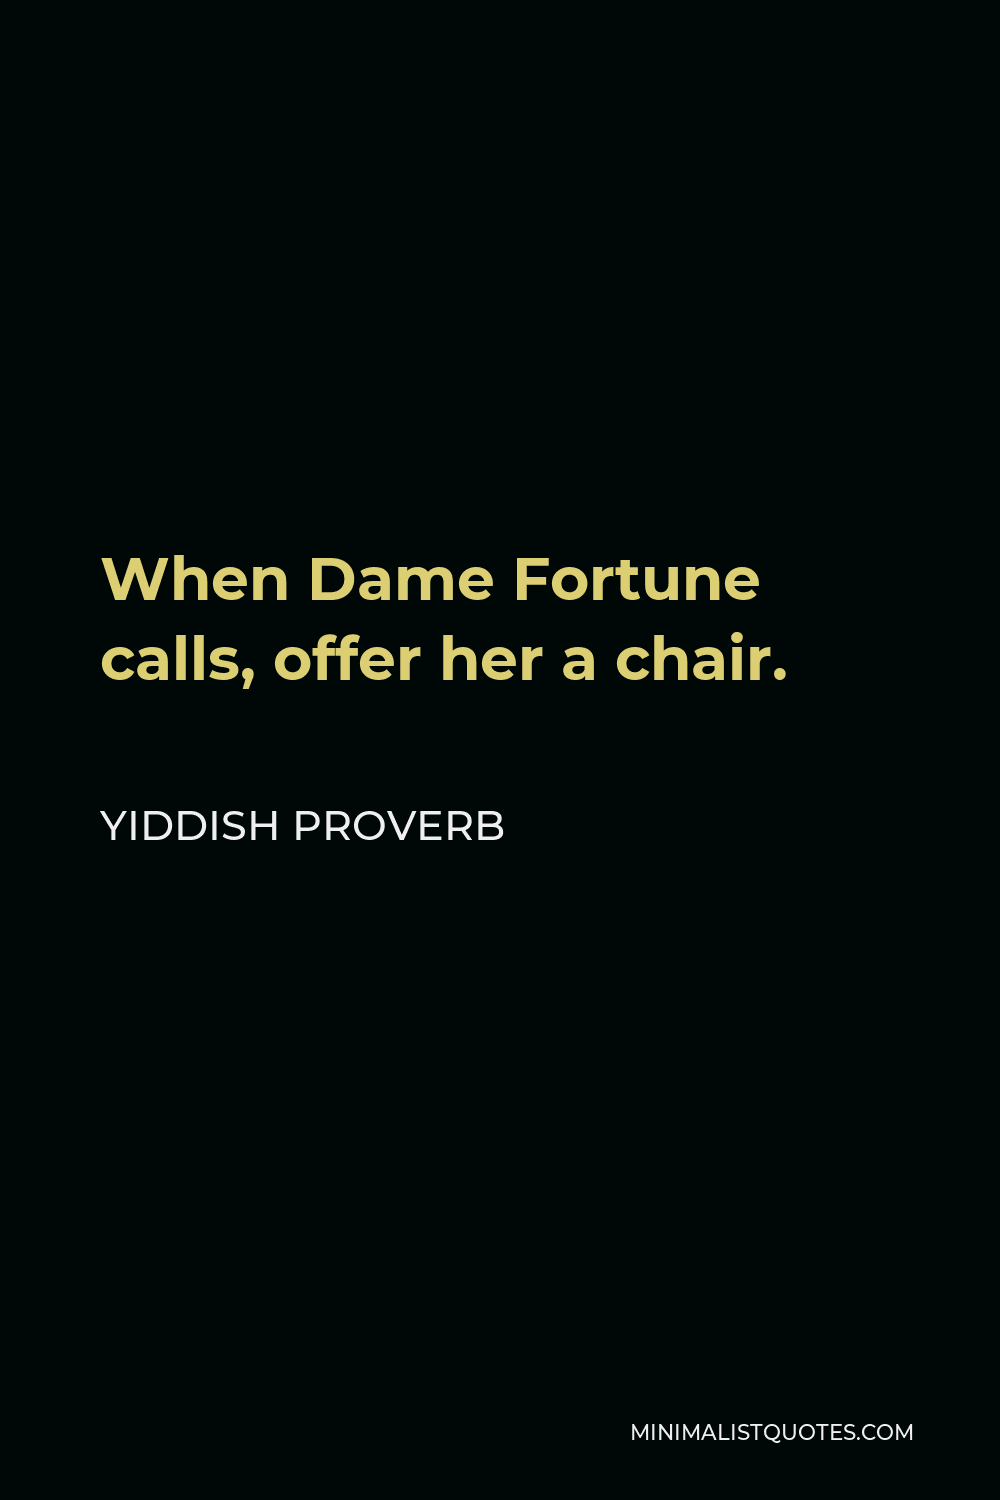 Yiddish Proverb Quote - When Dame Fortune calls, offer her a chair.